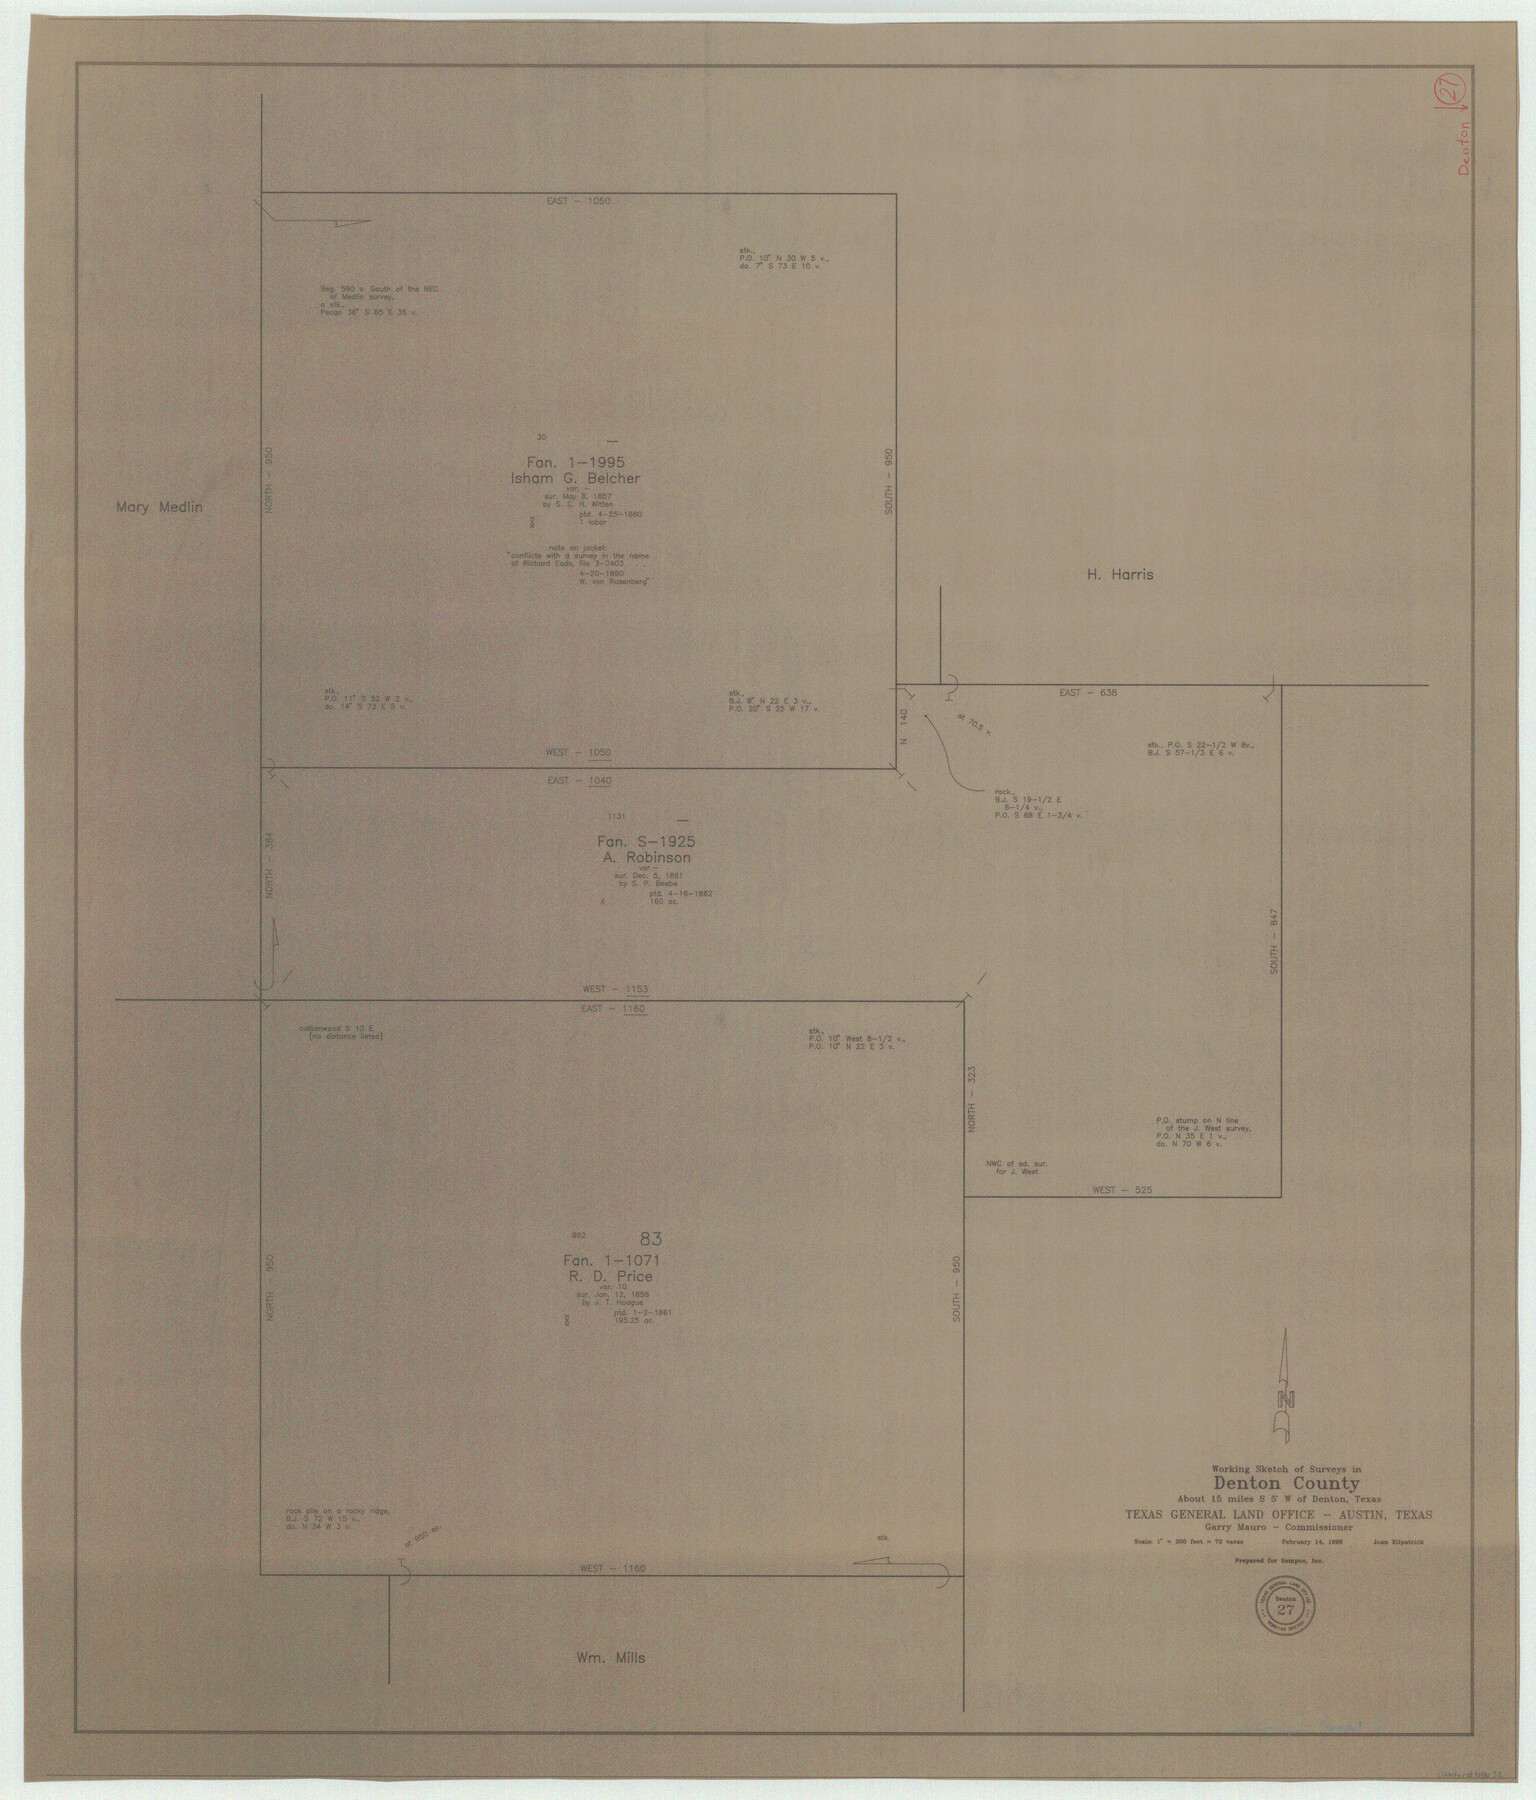 68632, Denton County Working Sketch 27, General Map Collection